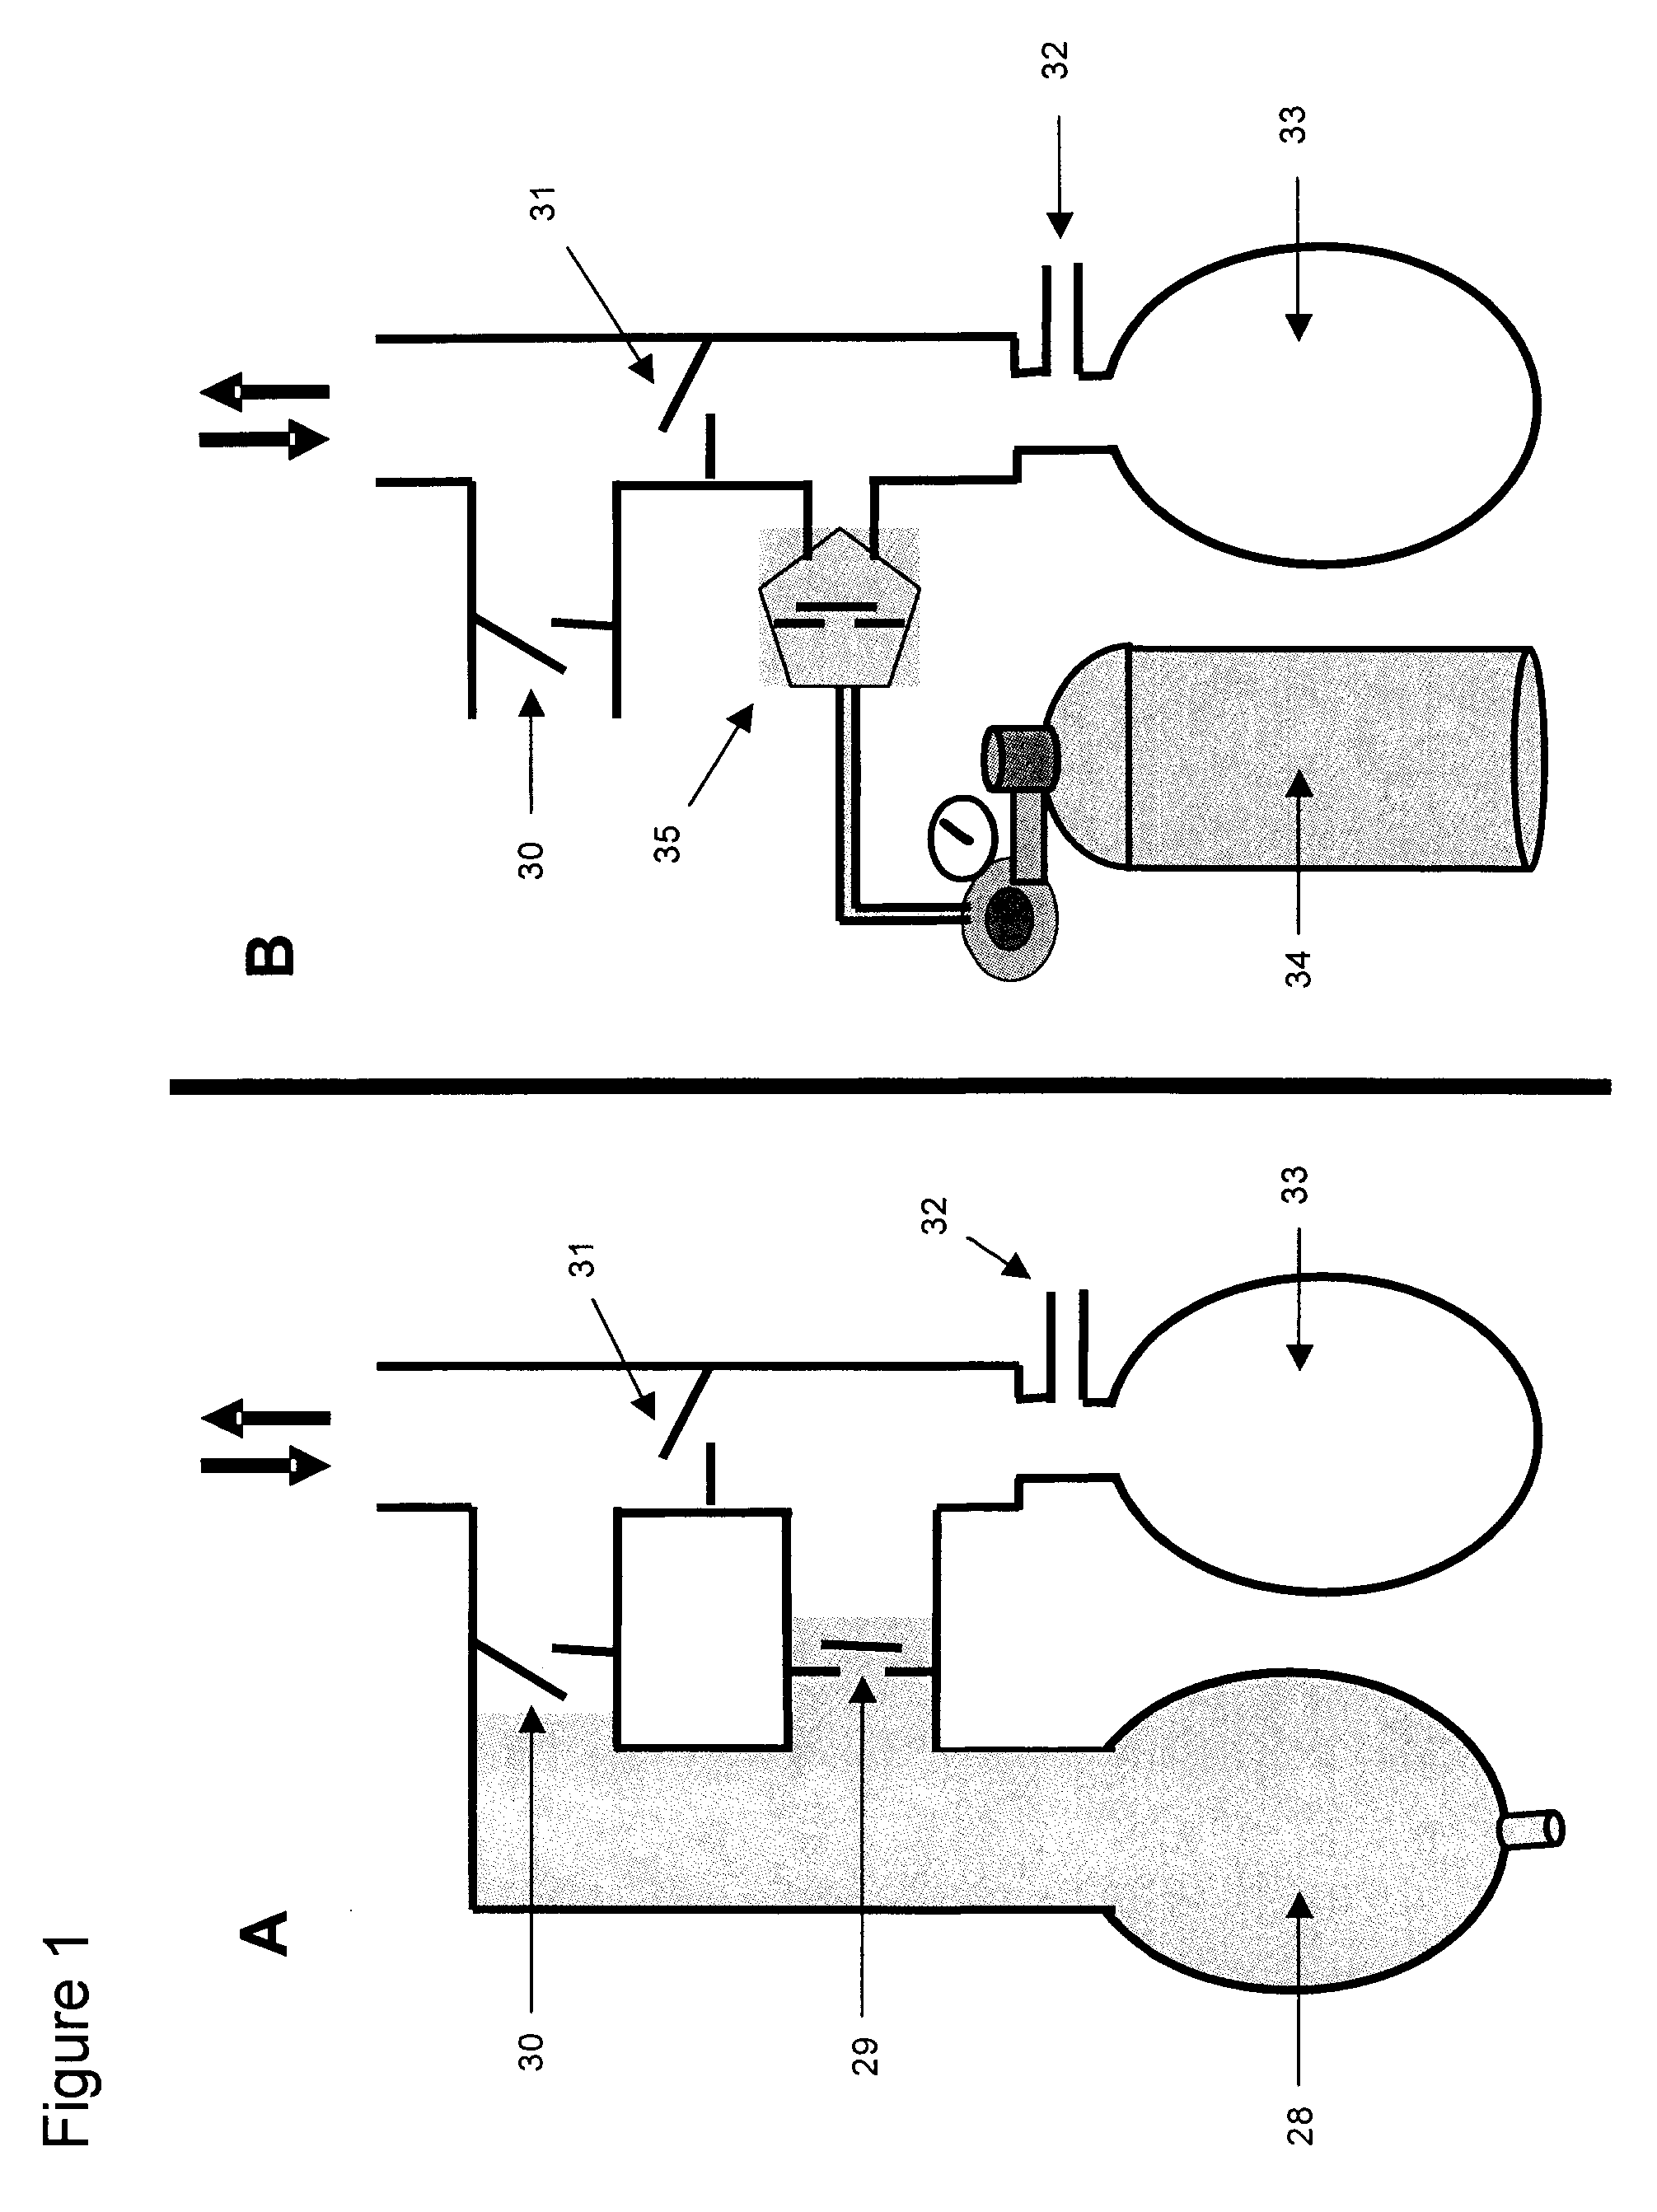 Method and apparatus to attain and maintain target end tidal gas concentrations